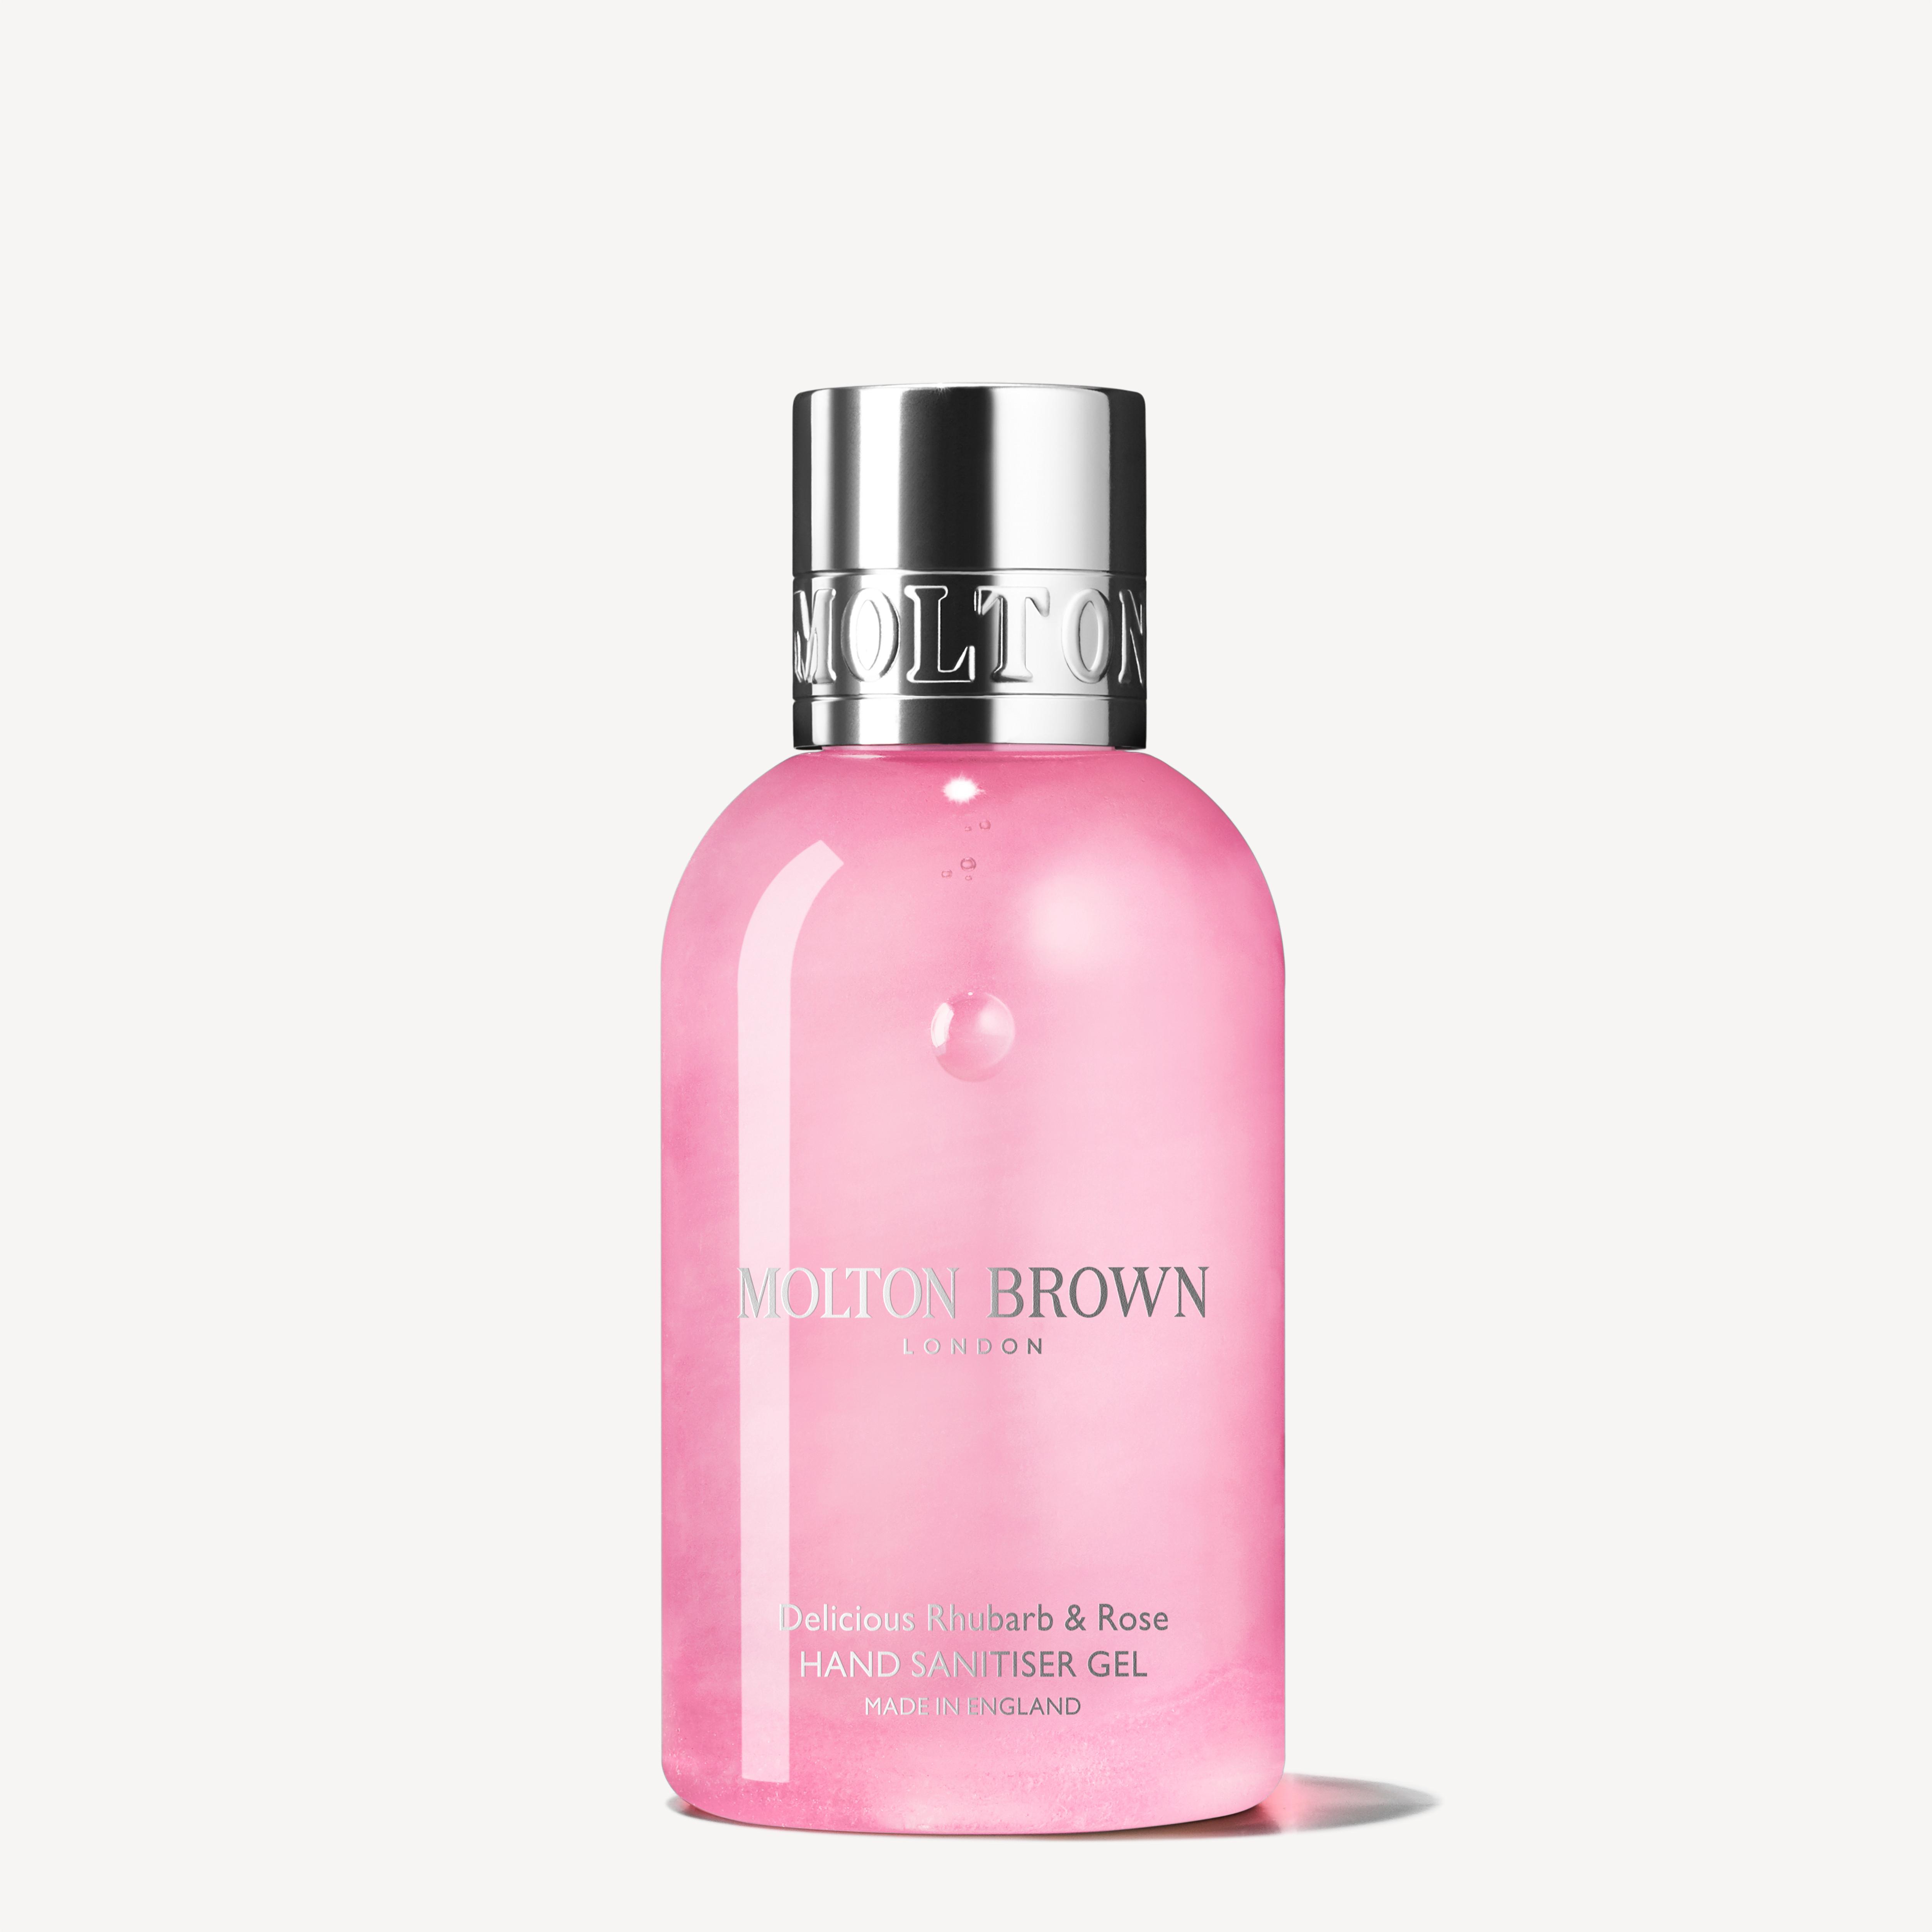 Molton Brown Delicious Rhubarb & Rose On-the-go Hand Sanitiser Gel 100ml